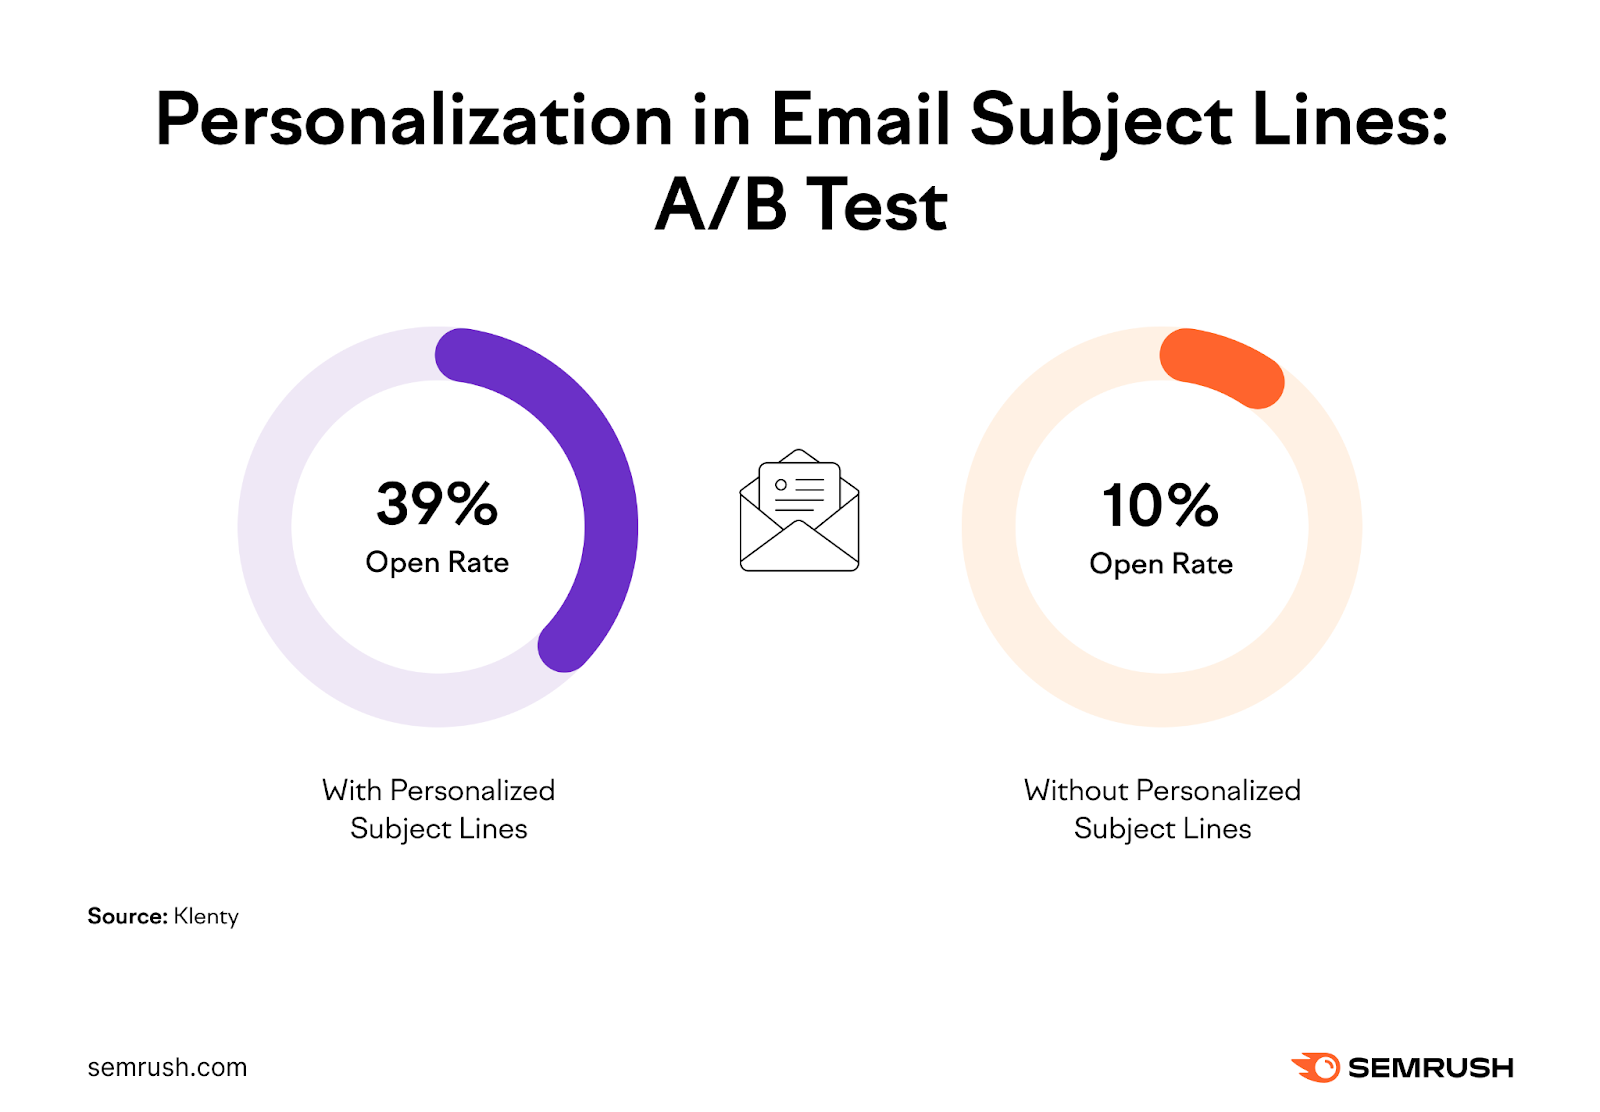 open rate is almost 20% greater when subject lines are personalized